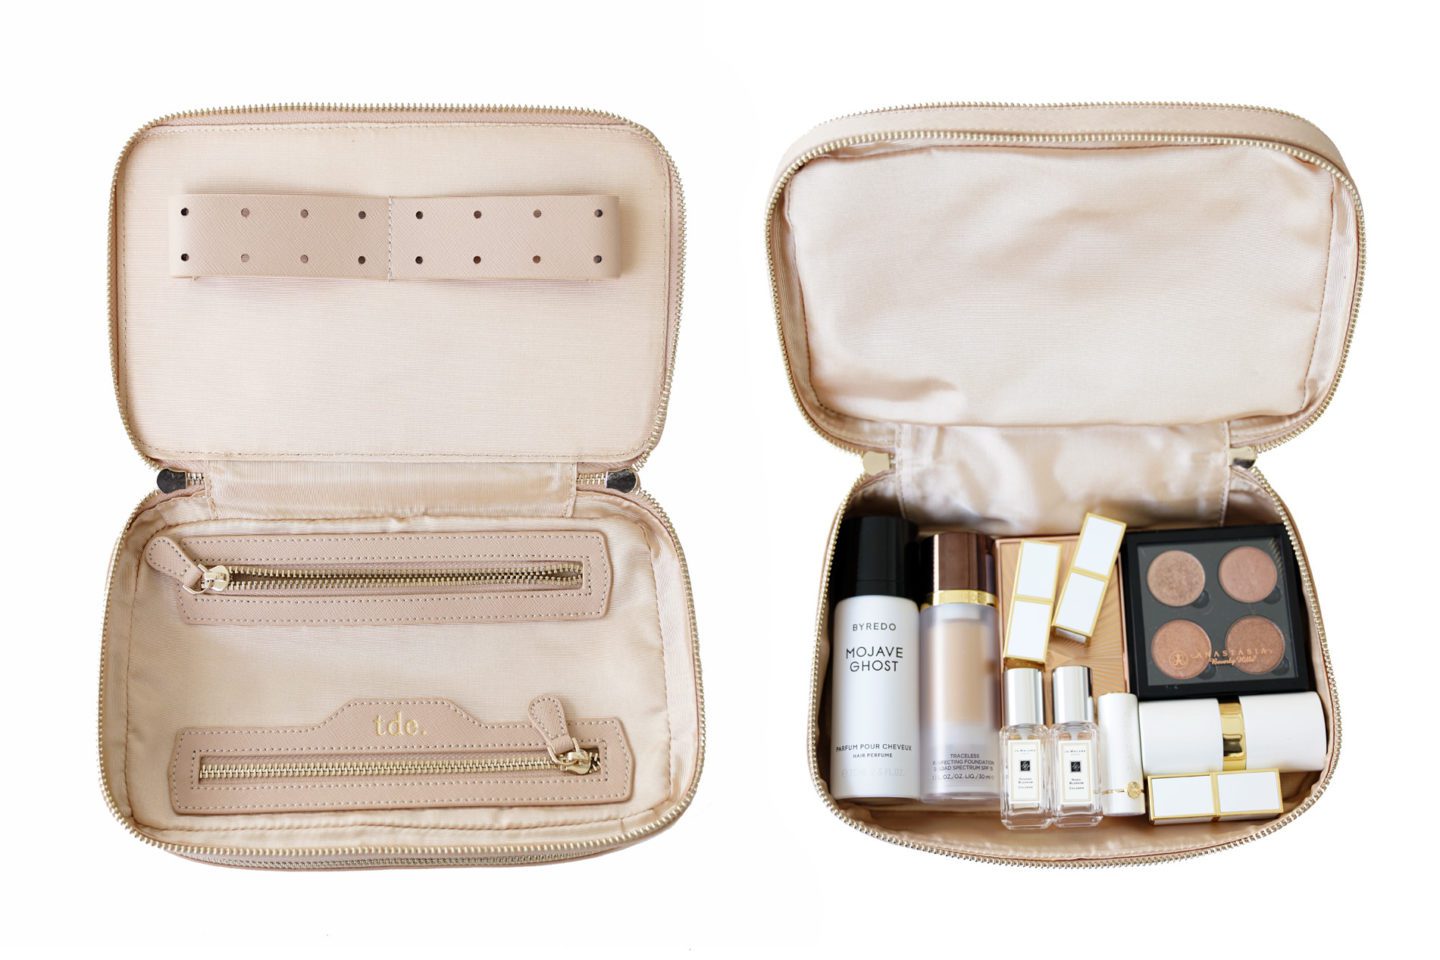 The Daily Edited Large Travel Case